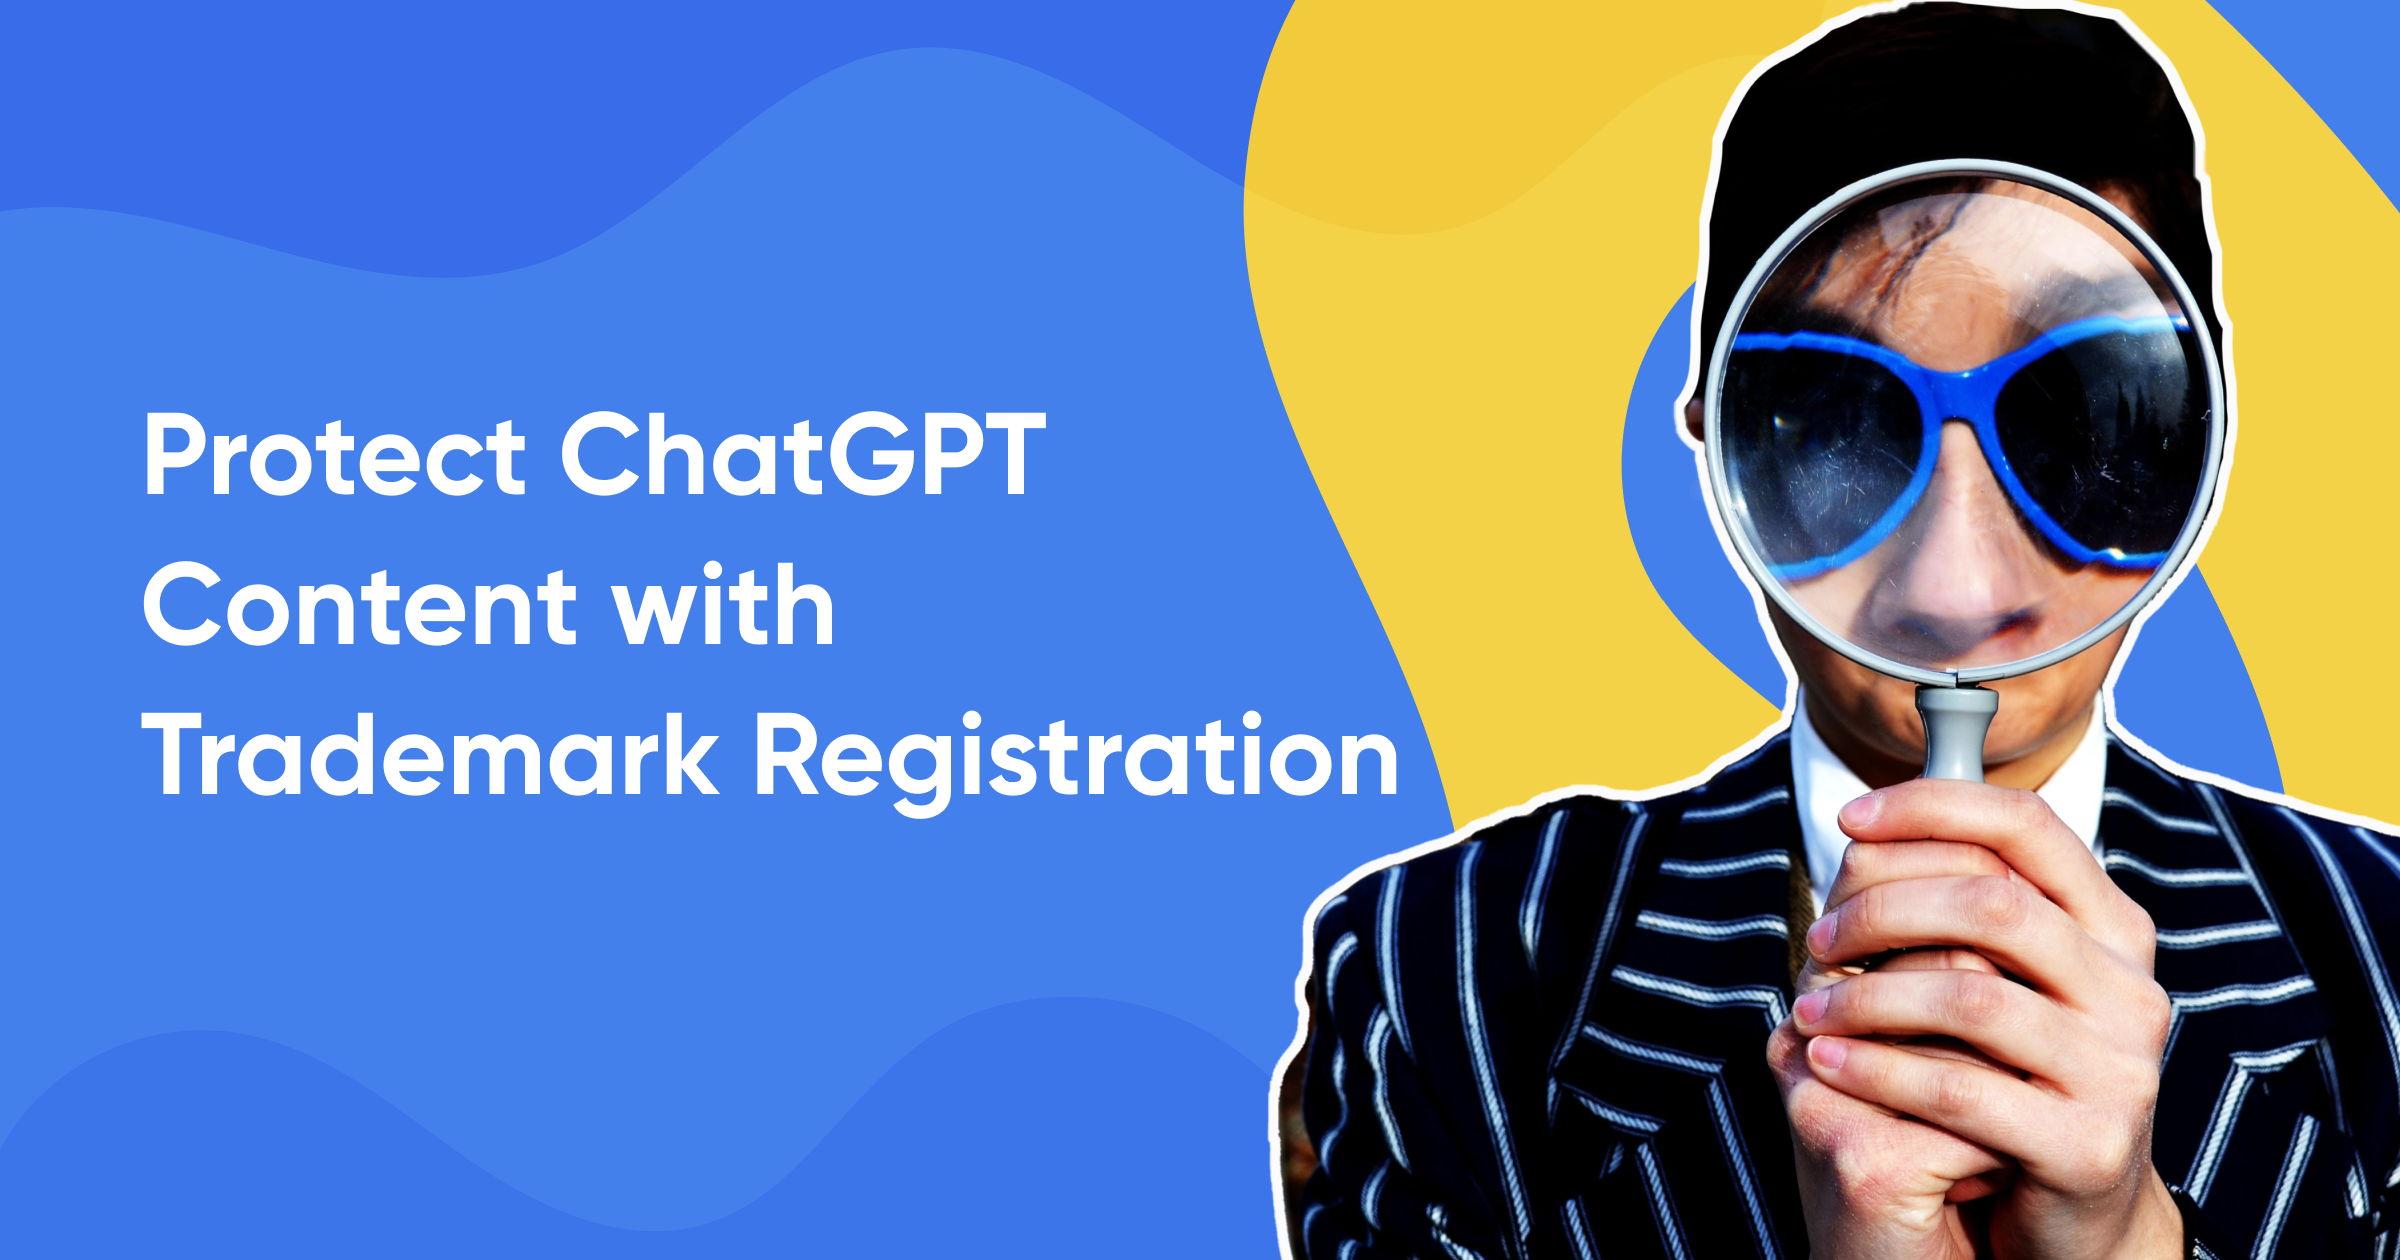 Protect ChatGPT Content with Trademark Registration